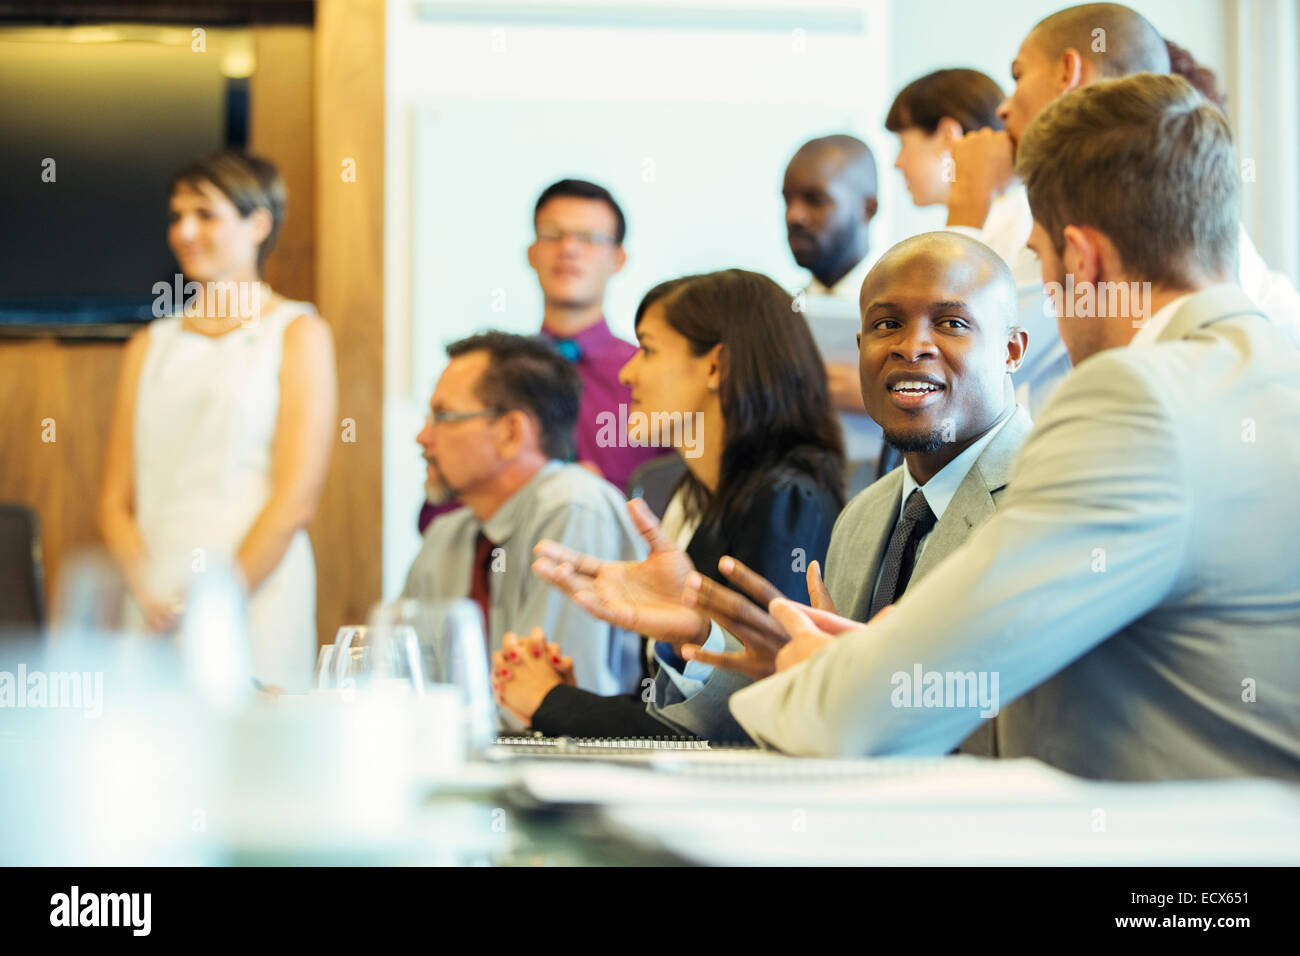 Group of business people having meeting in conference room Stock Photo